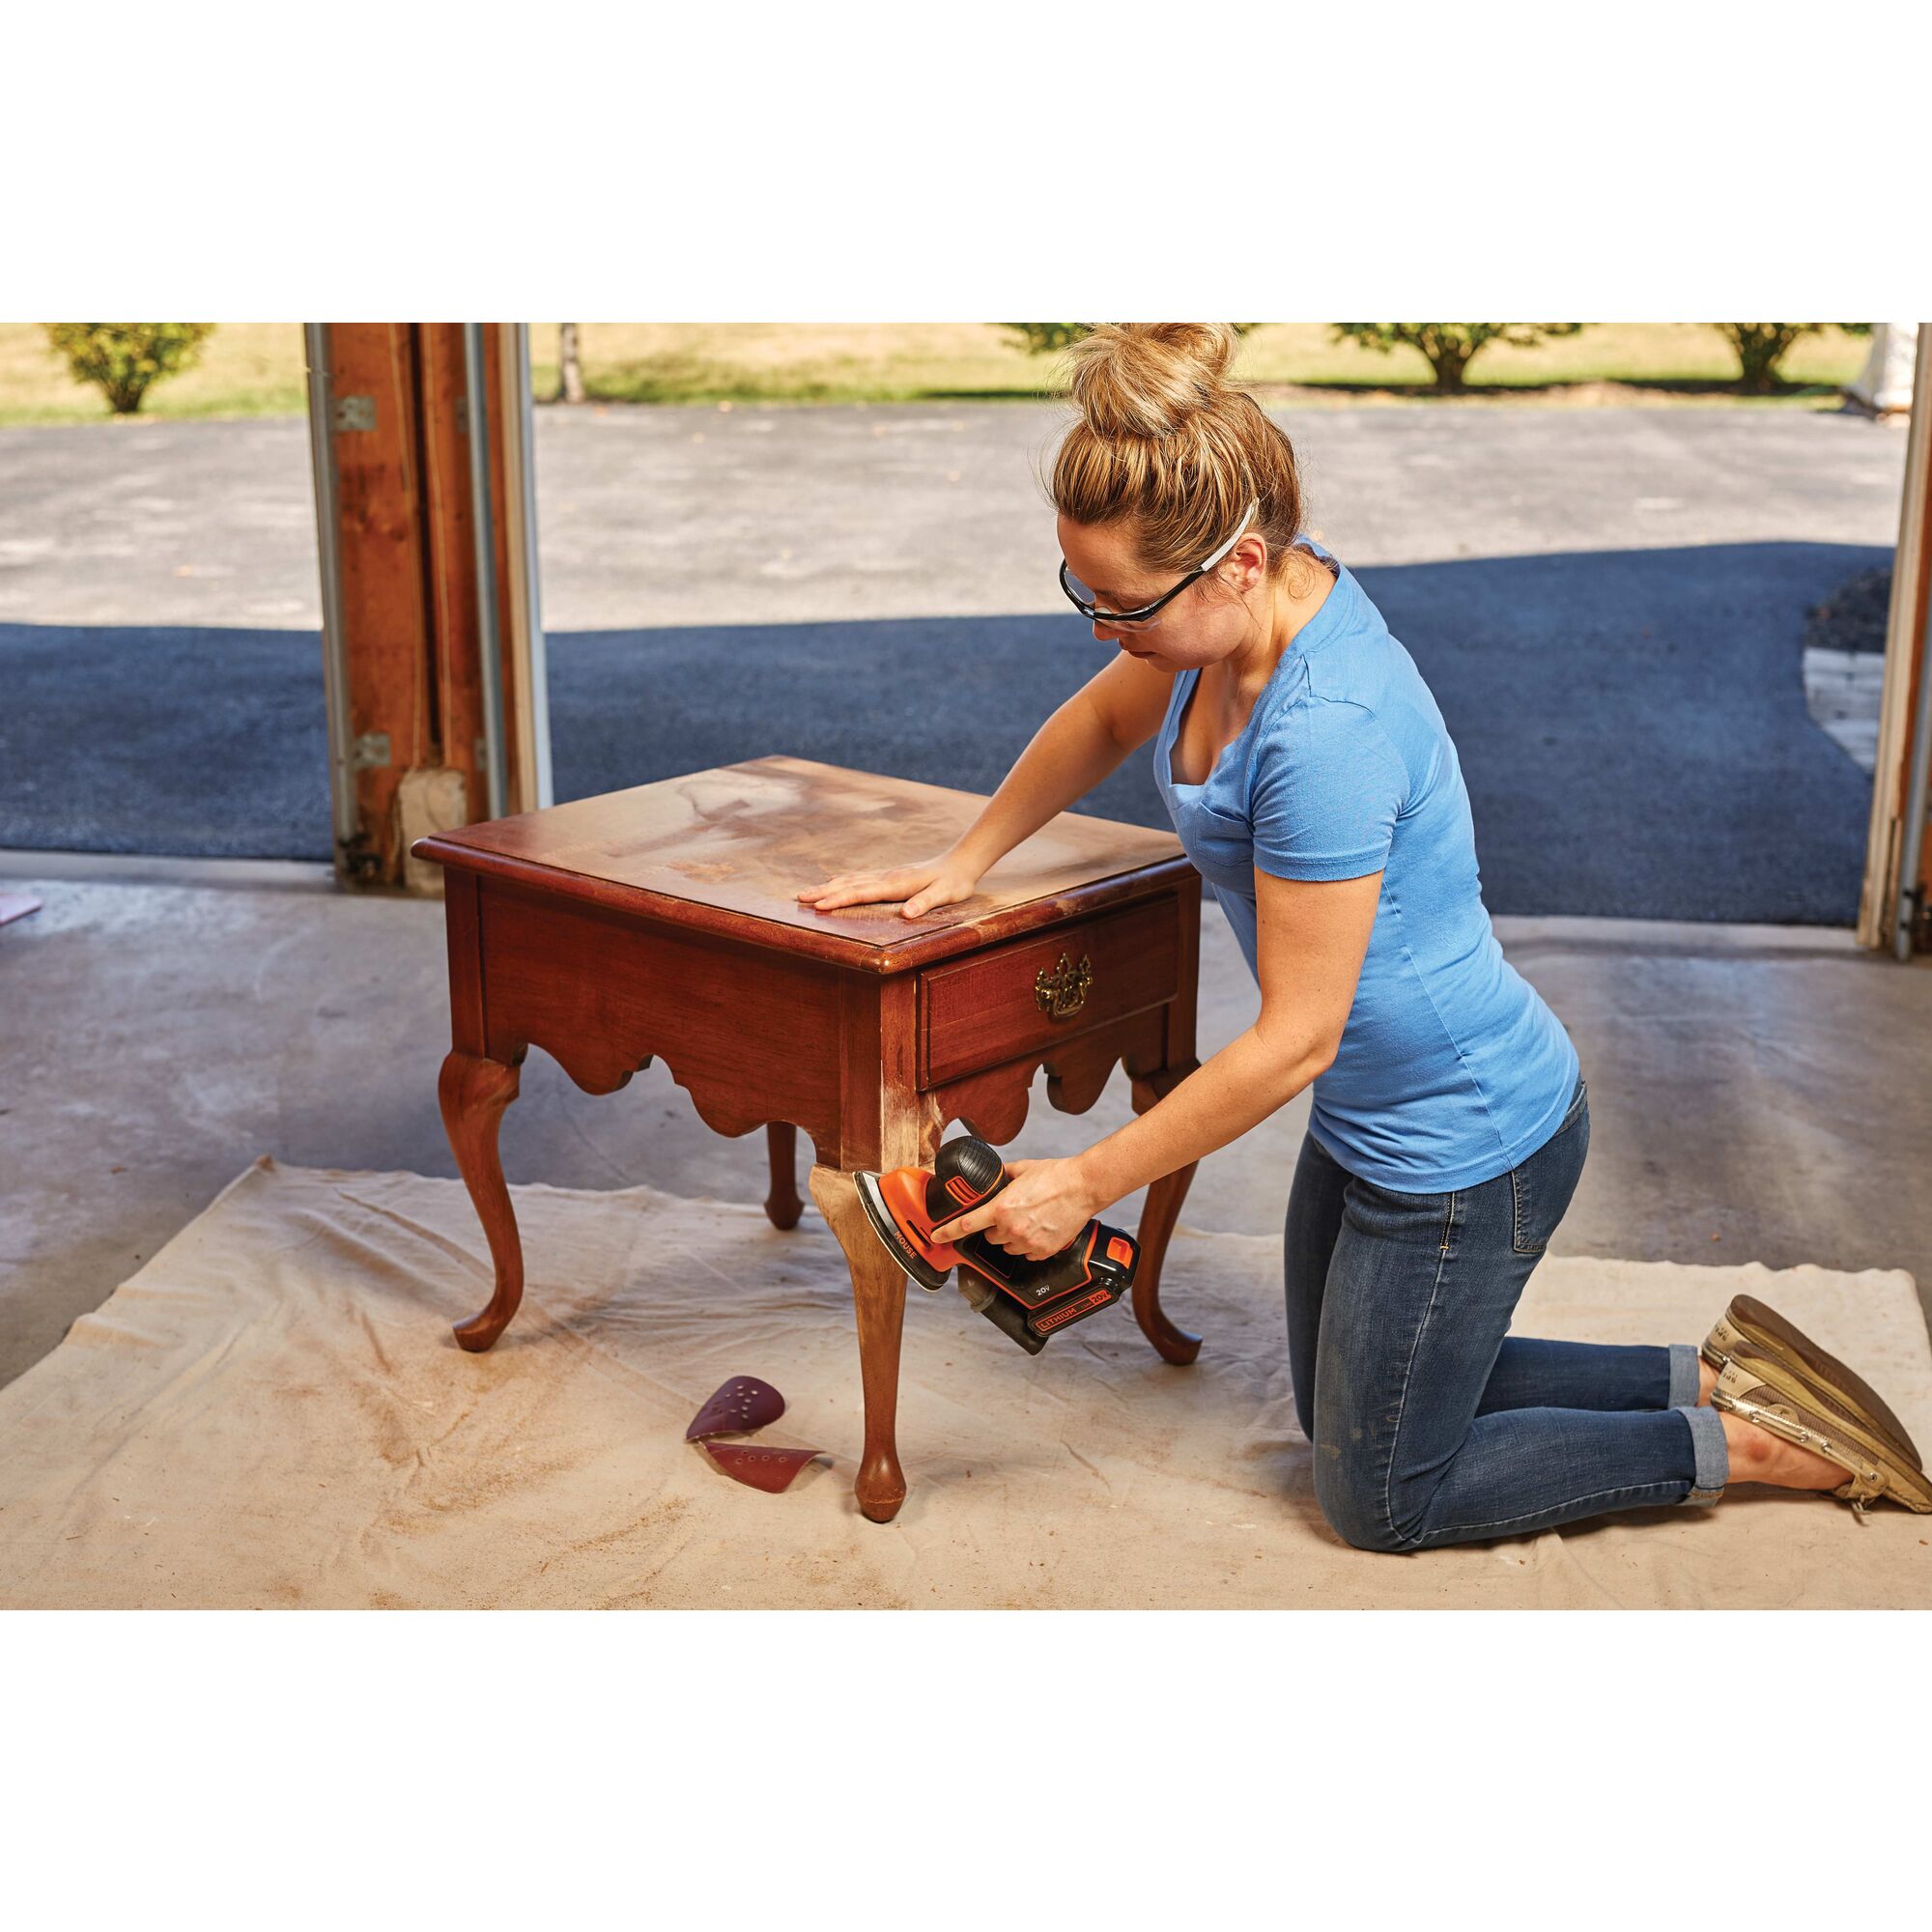 Corded drill / driver and mouse detail sander combo kit being used by a person to refinish furniture.\n